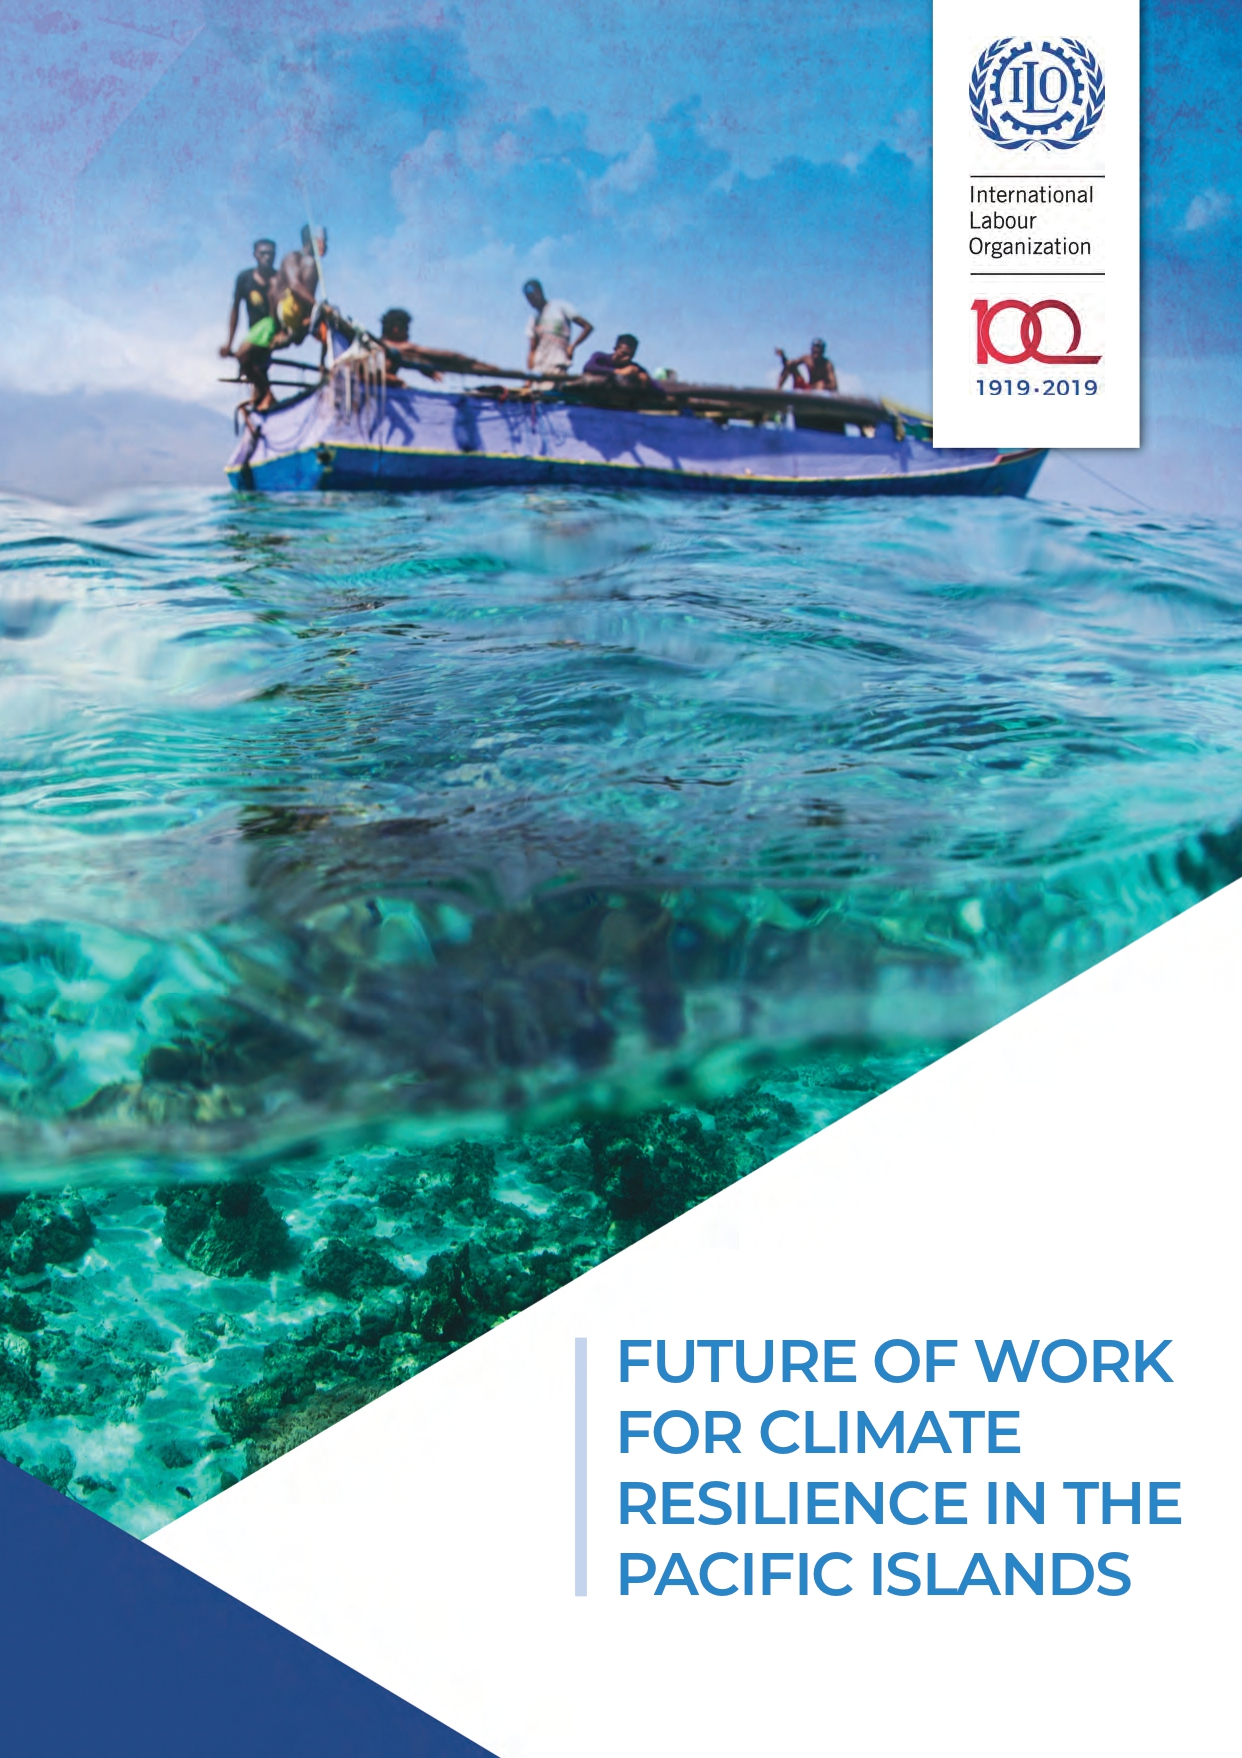 Future of work for climate resilience in the Pacific Islands